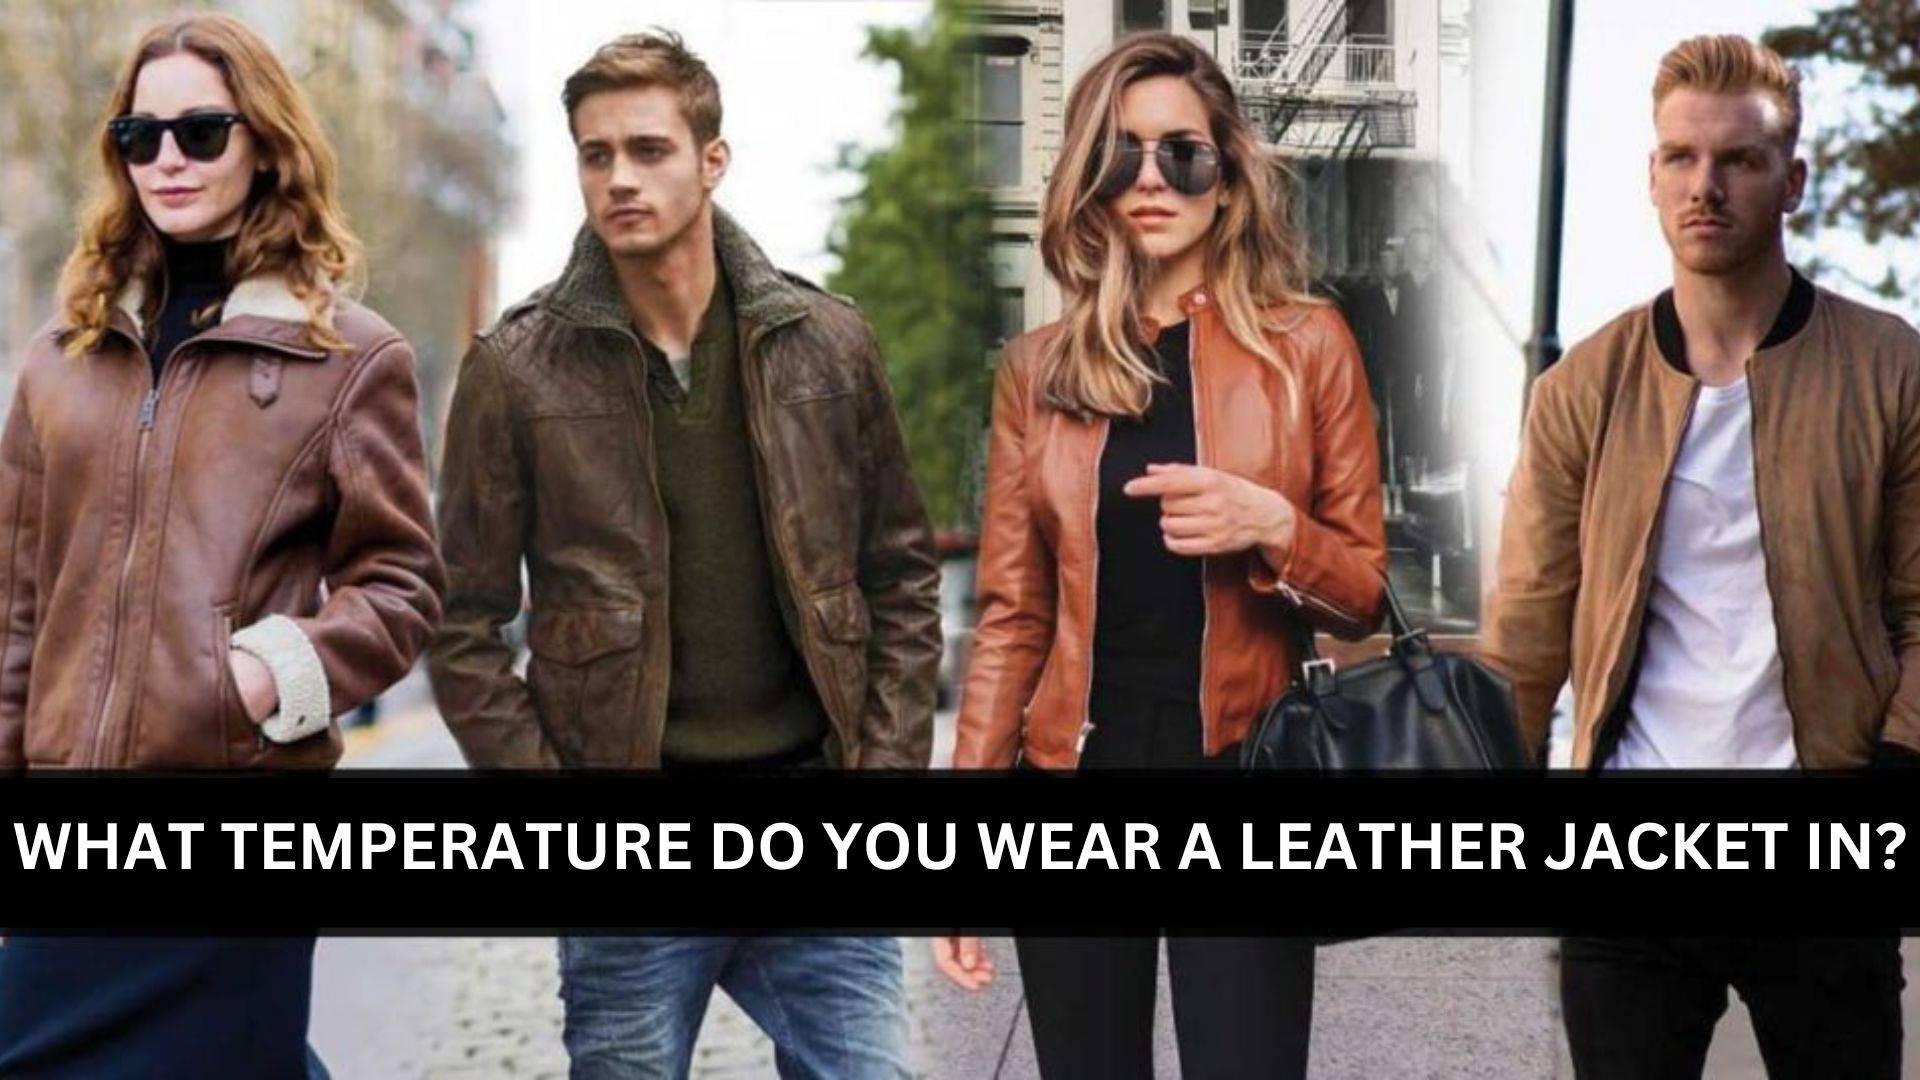 What temperature do you wear a leather jacket in